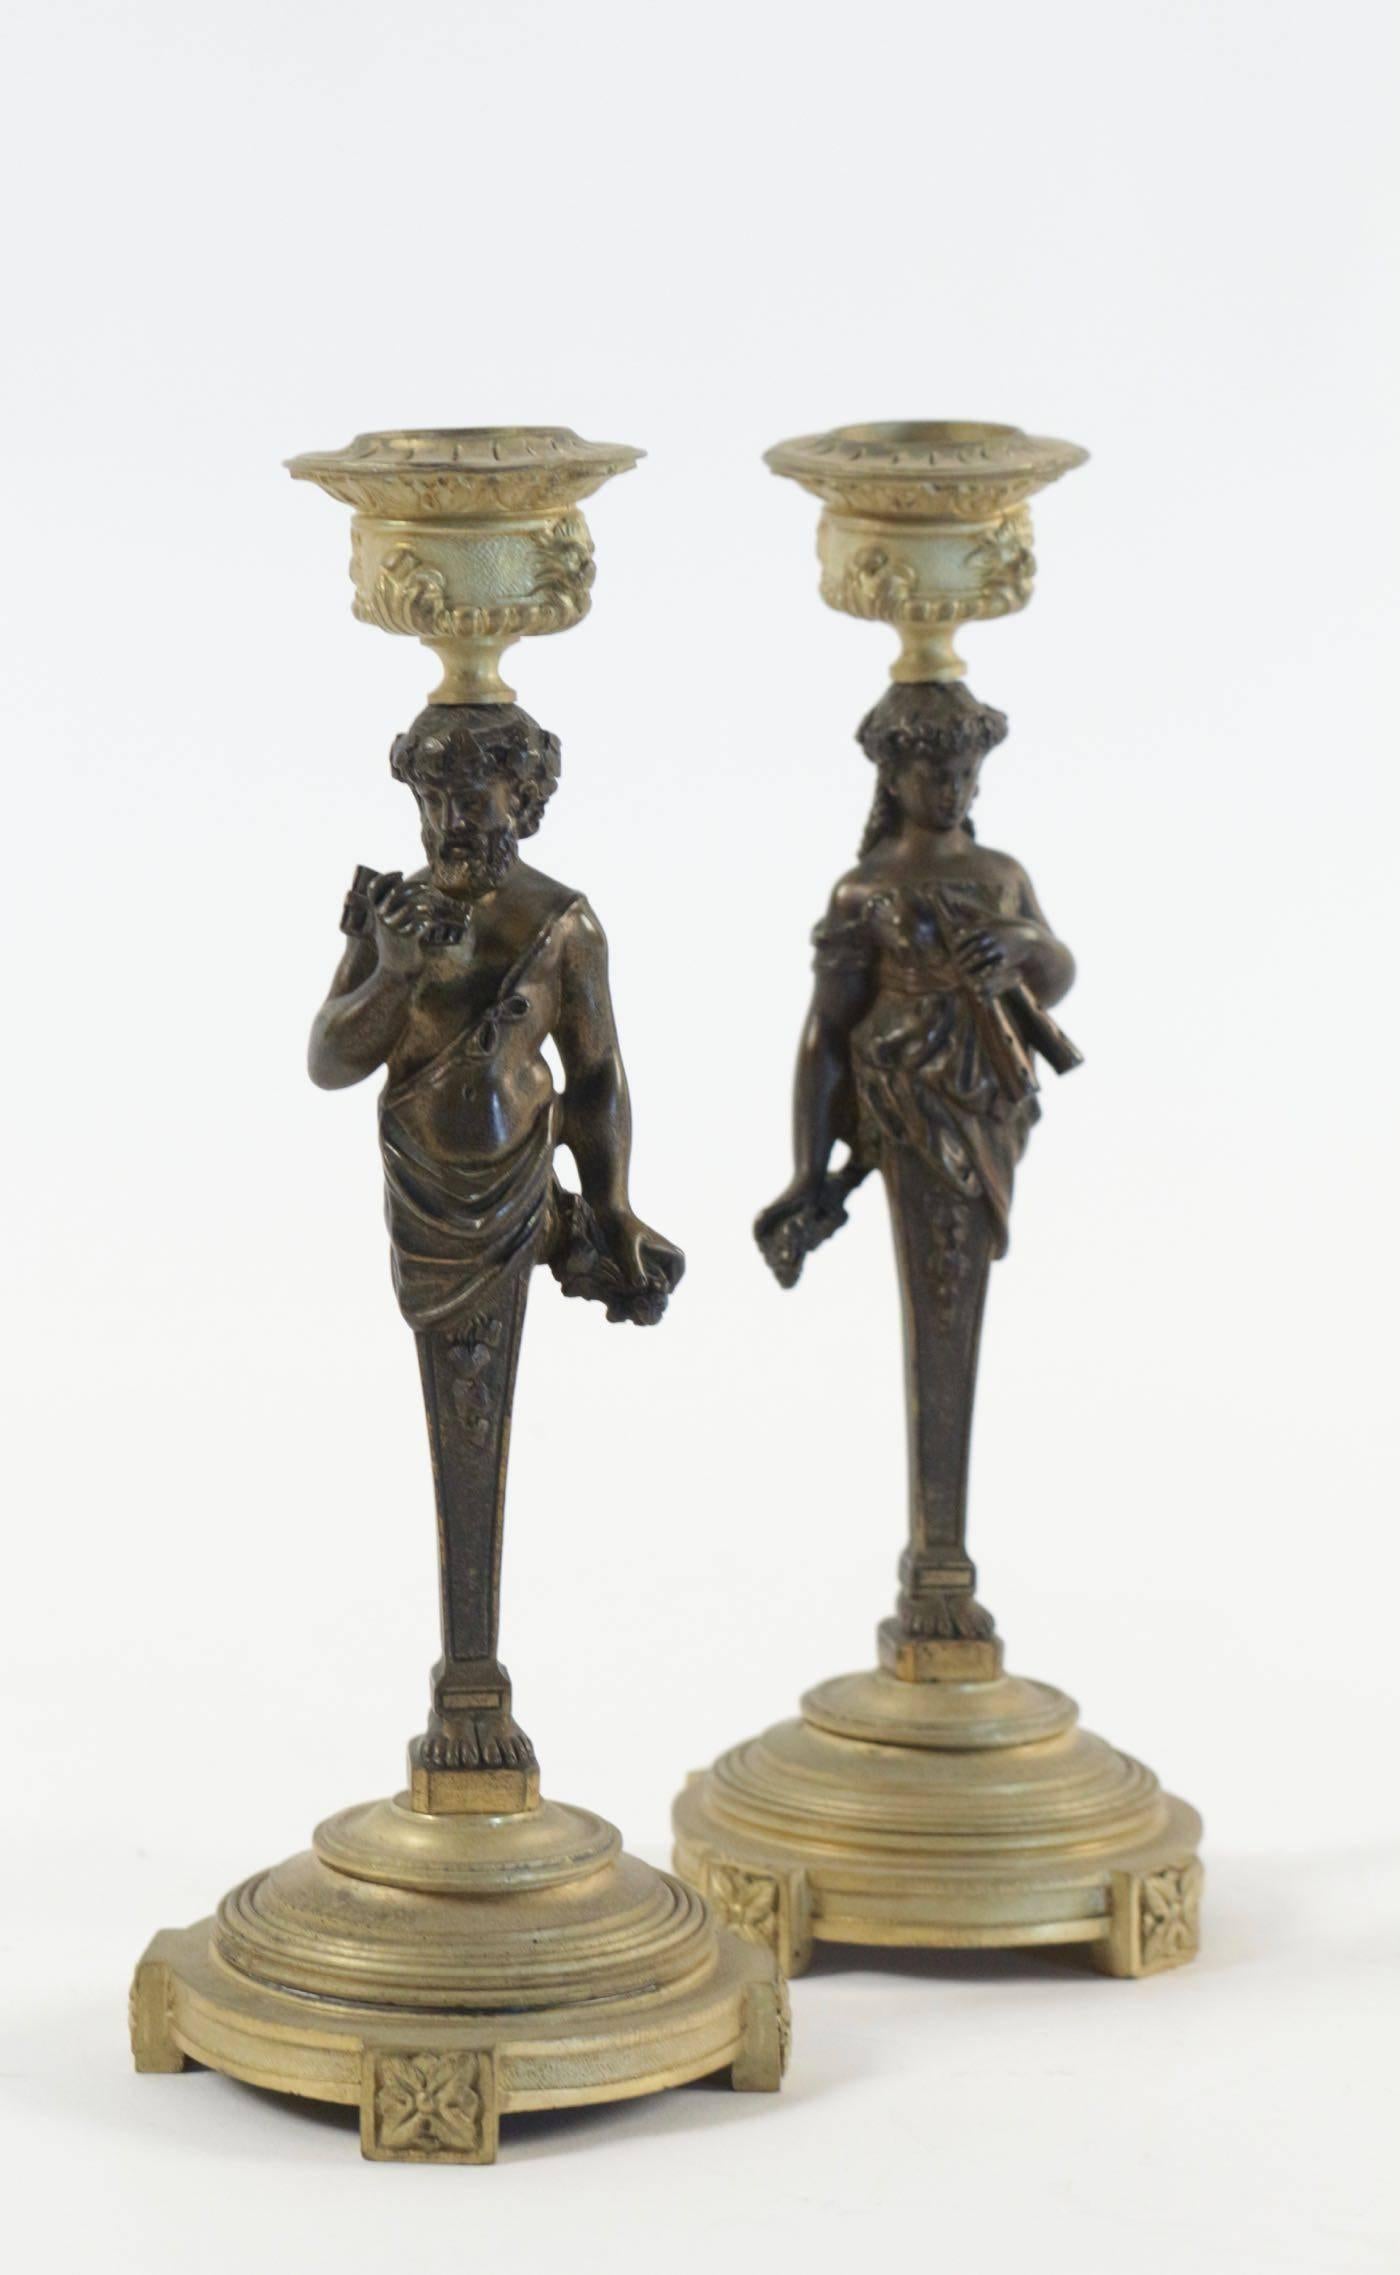 Pair of period Napoleon III bronze candlesticks from the 19th century.
Measures: H 20 cm, D 7 cm.